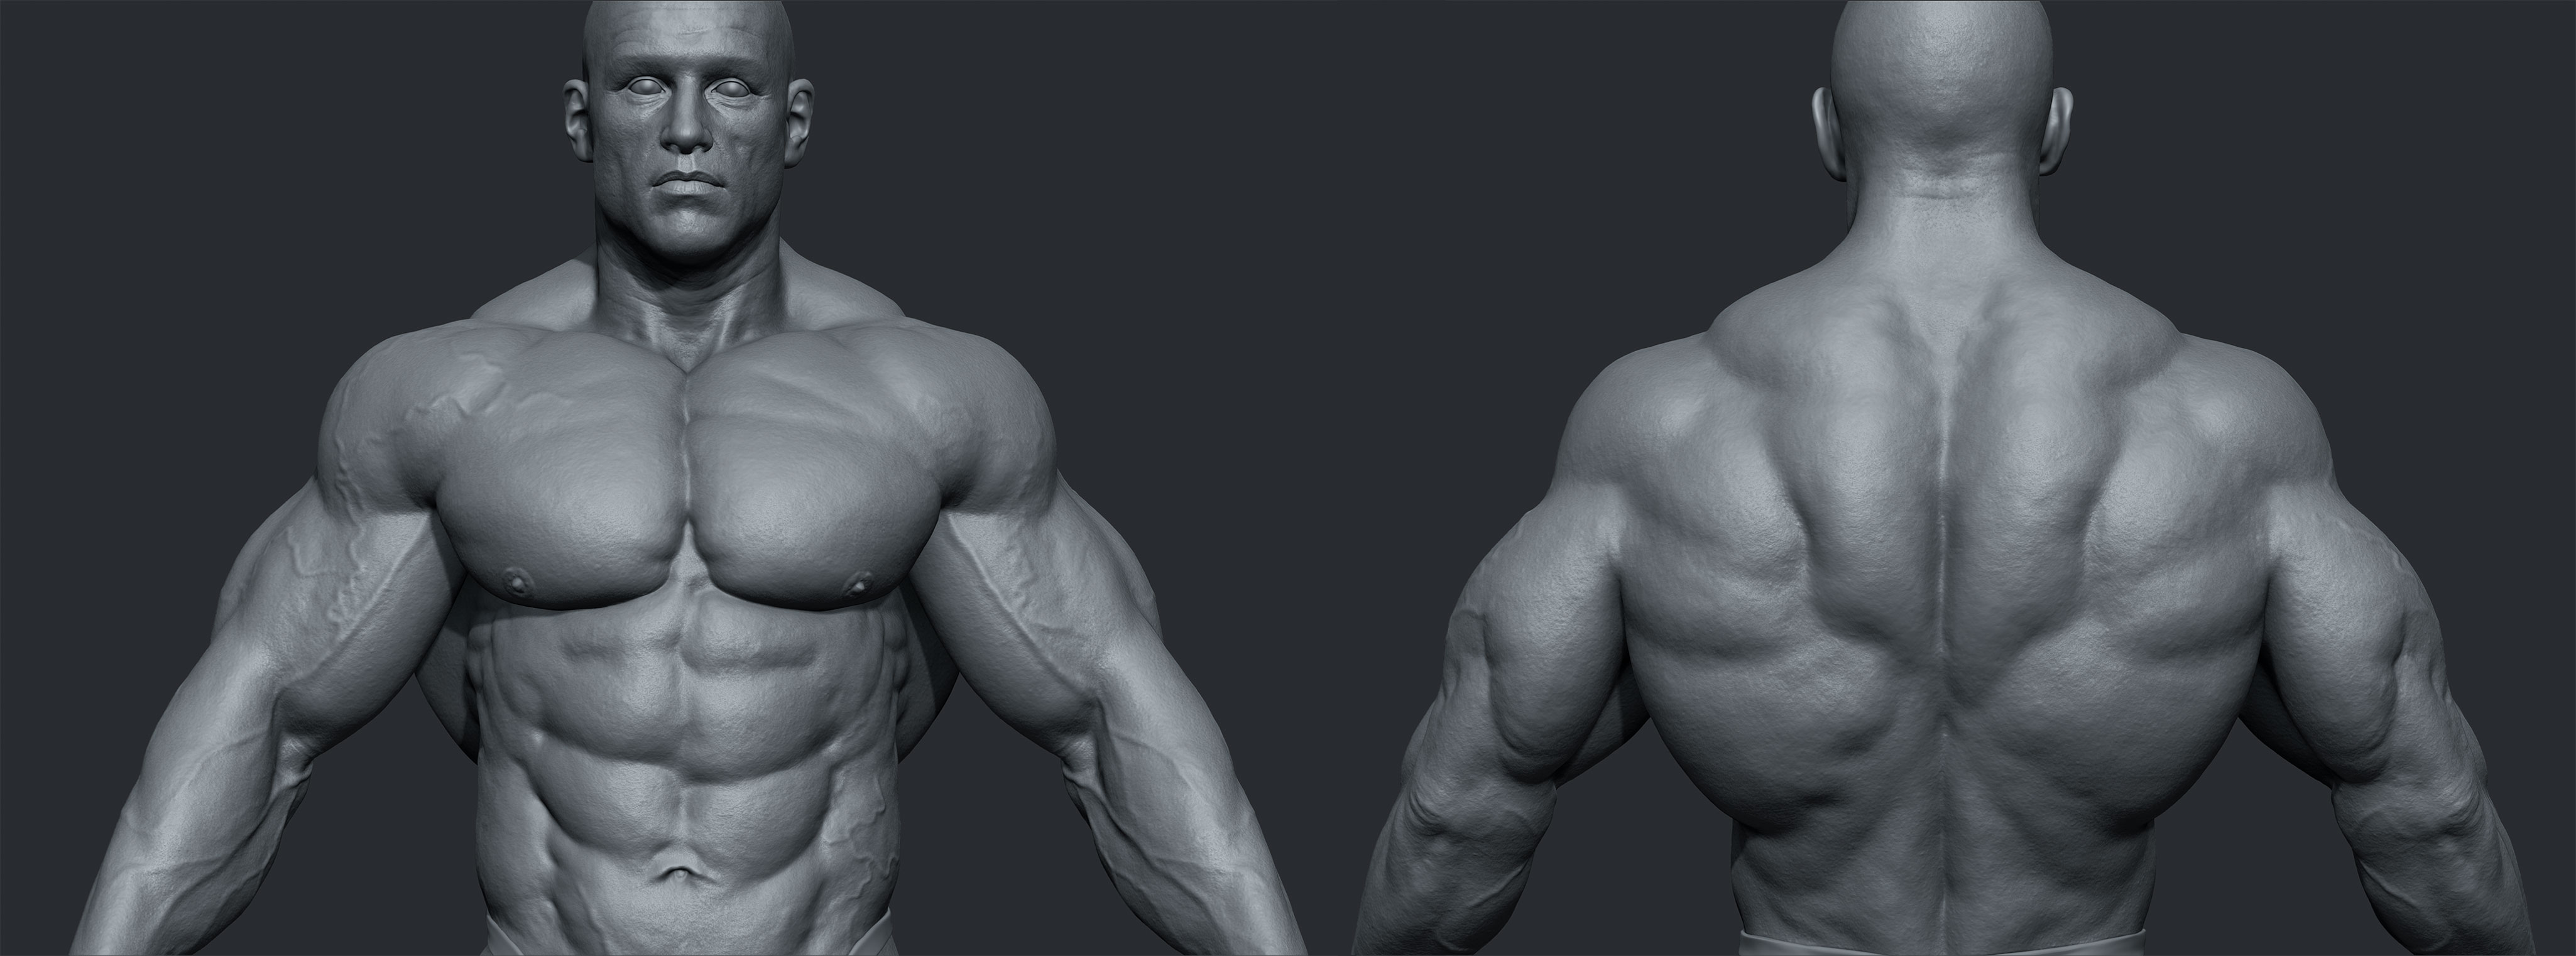 Male Body Builder - ZBrushCentral